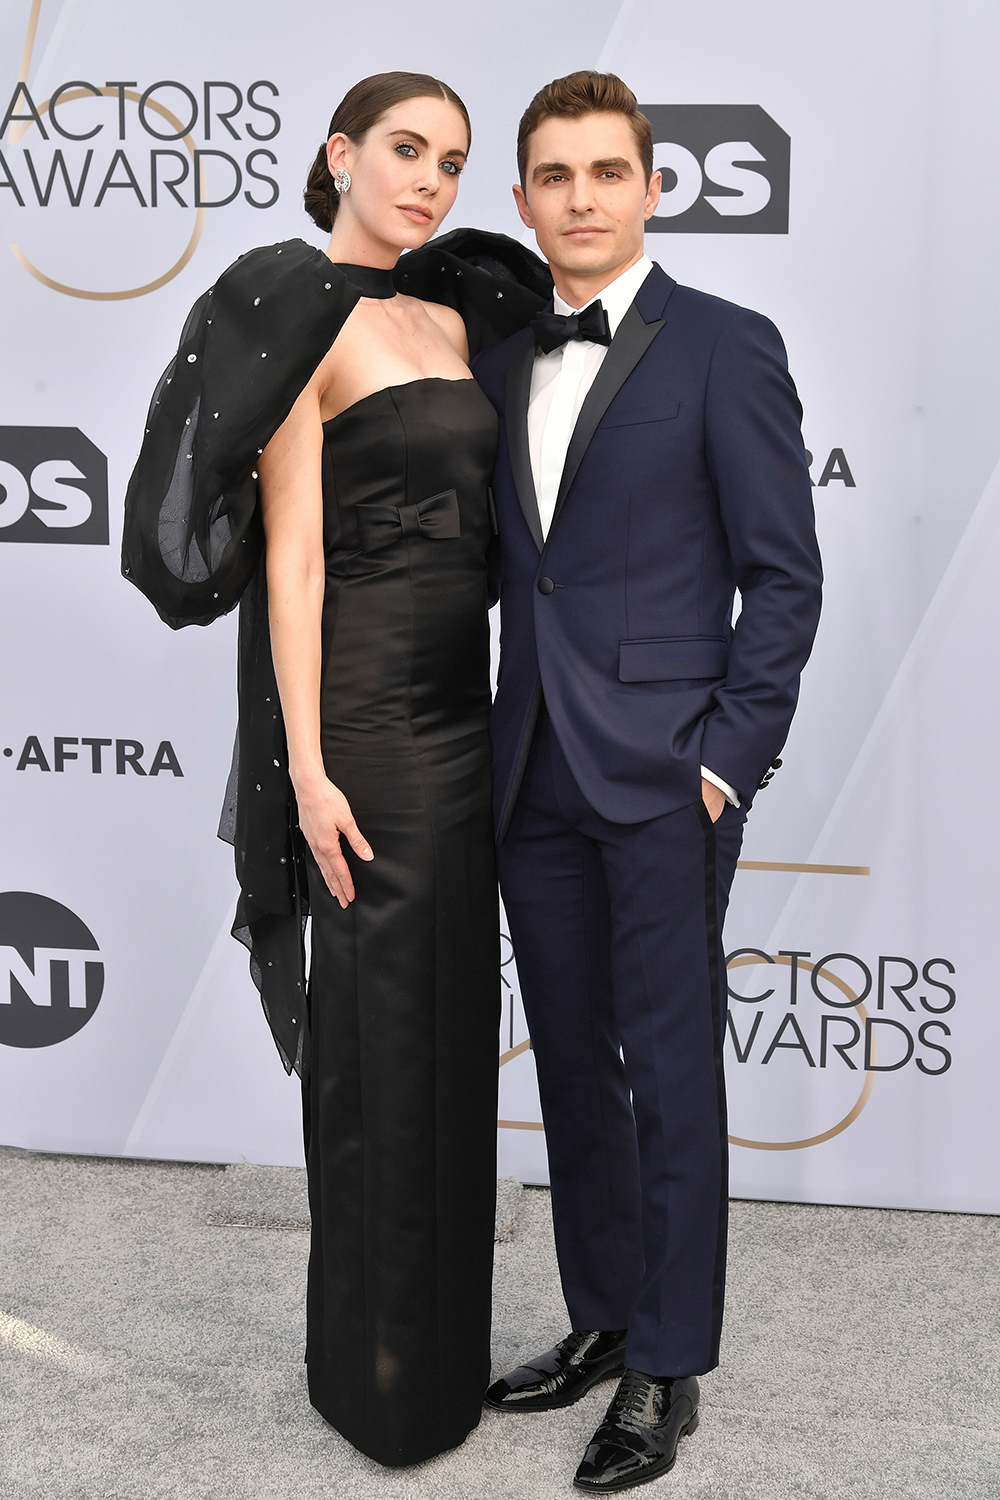 Mandatory Credit: Photo by Rob Latour/REX/Shutterstock (10072501eq) Alison Brie and Dave Franco 25th Annual Screen Actors Guild Awards, Arrivals, Los Angeles, USA - 27 Jan 2019